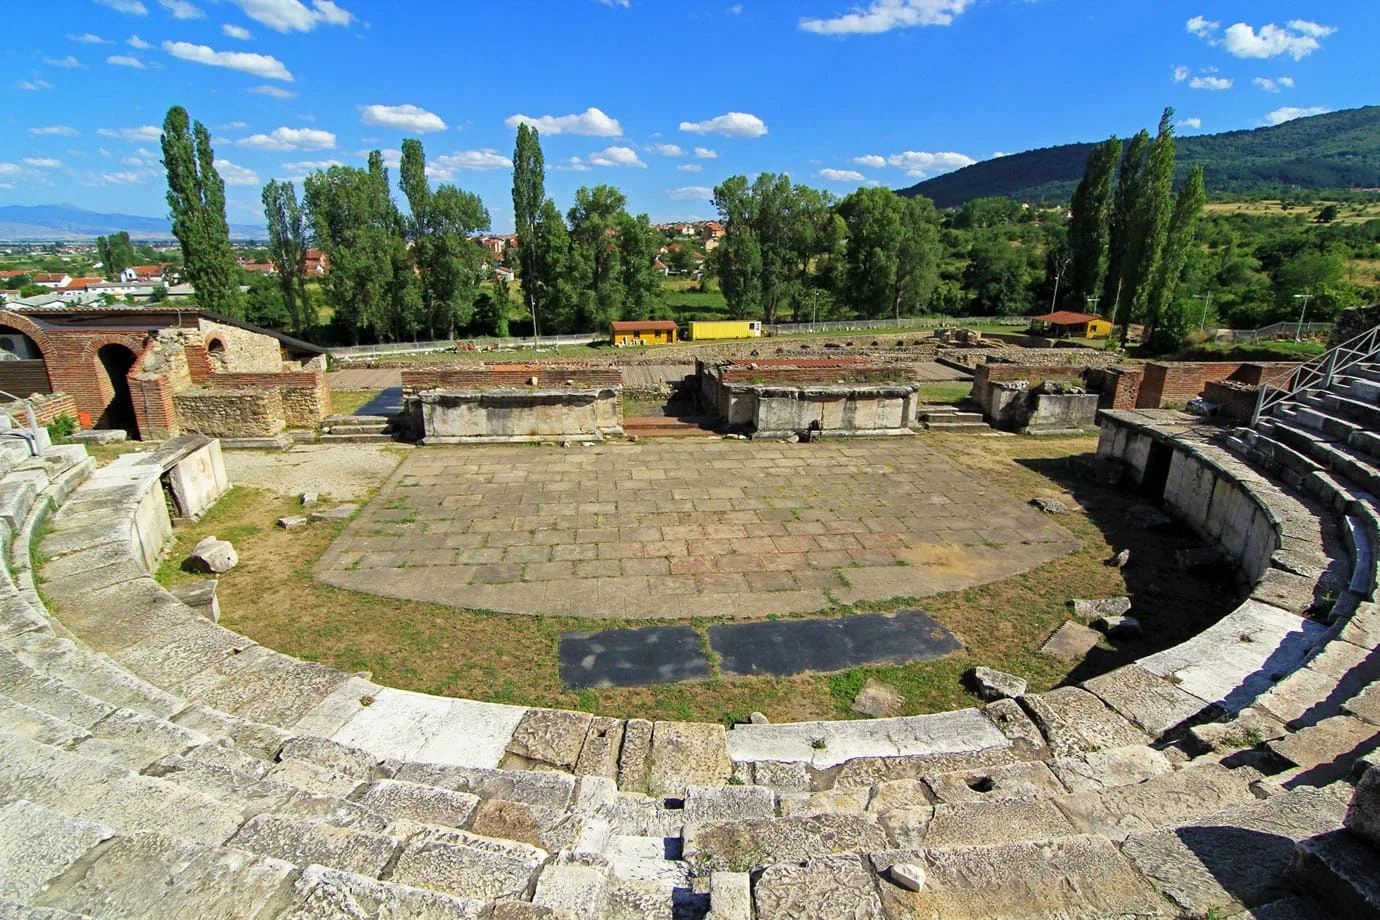 The real eye-draw of the ancient city is the theatre built by Emperor Hadrian